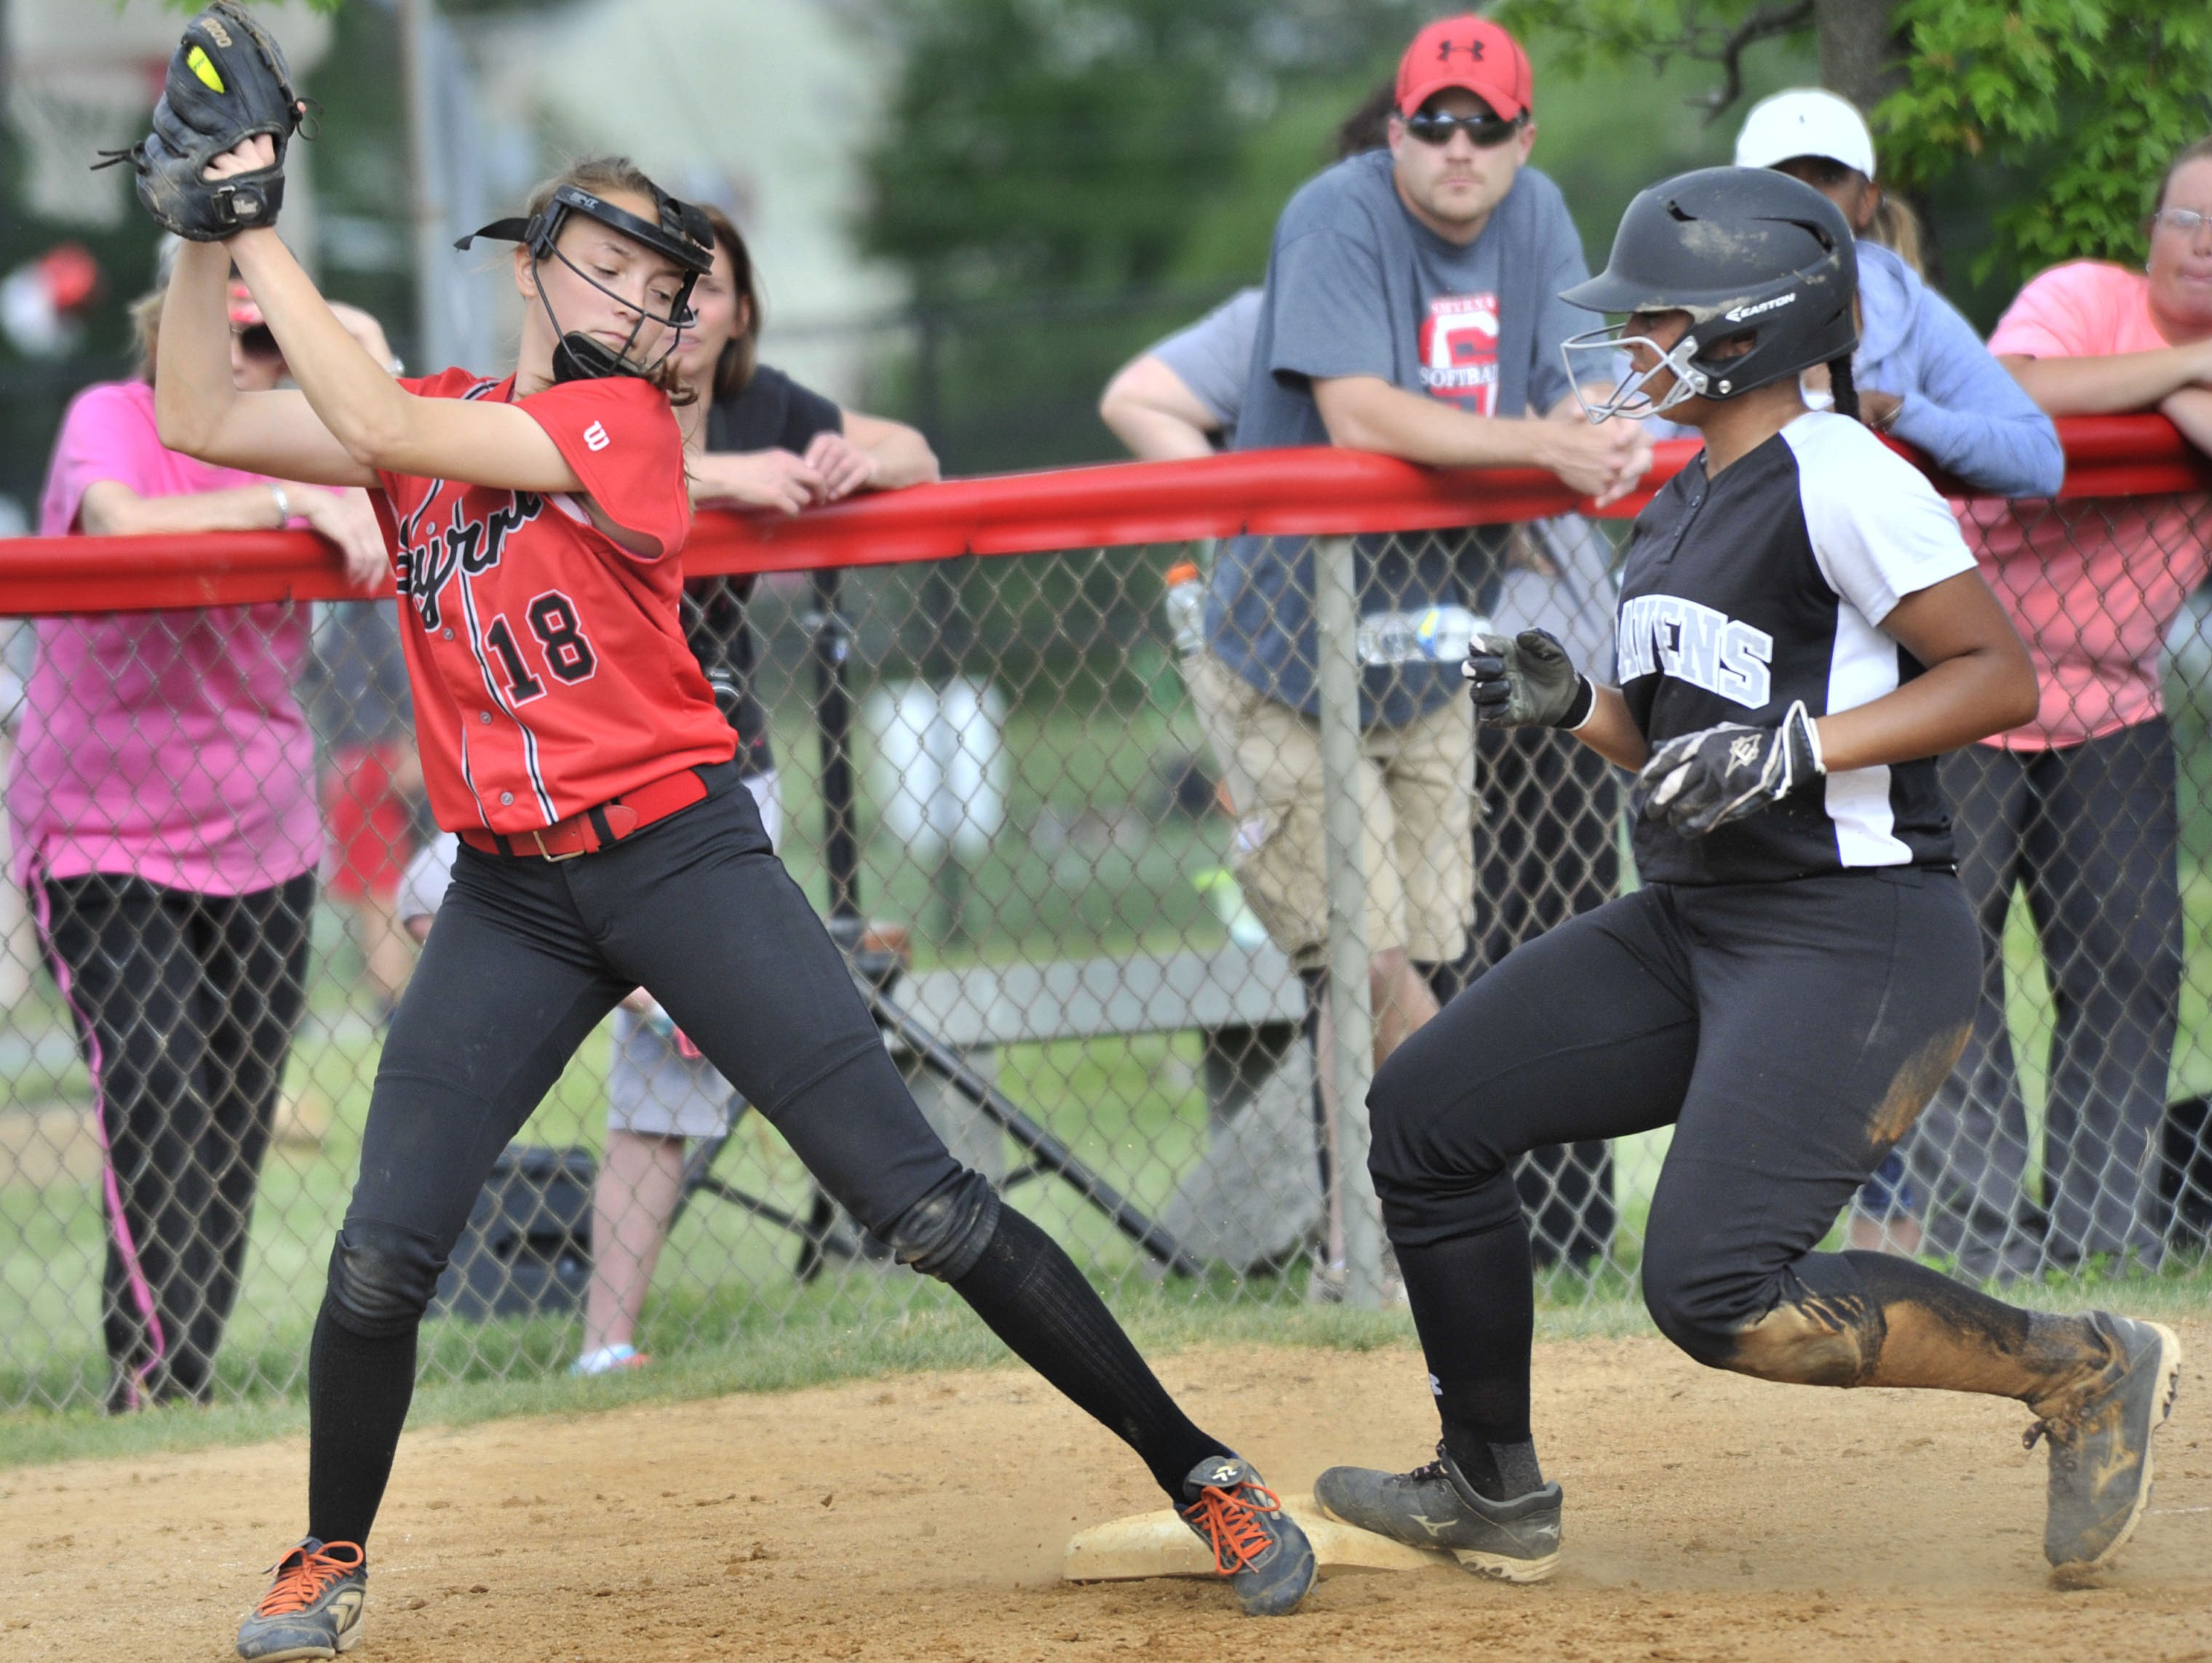 Sussex Tech's Madison Watson advanced to third when a pitch got away from the Eagles' catcher early in the game Thursday. Sarah Miller of the Eagles takes in a late throw.